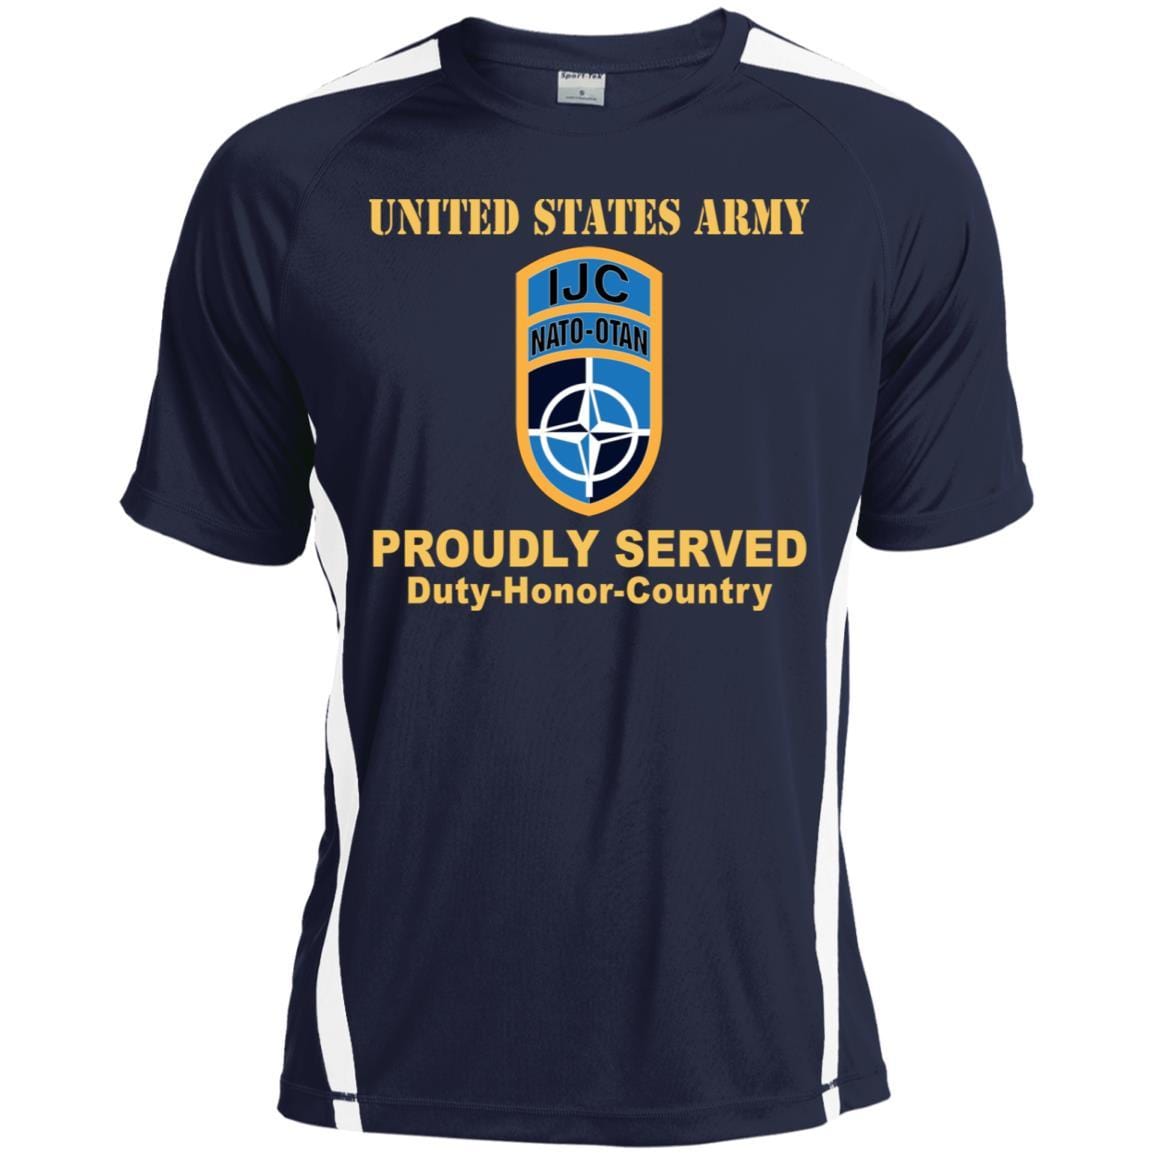 US ARMY CSIB NATO ISAF JOINT COMMAND IN AFGHANISTAN- Proudly Served T-Shirt On Front For Men-TShirt-Army-Veterans Nation